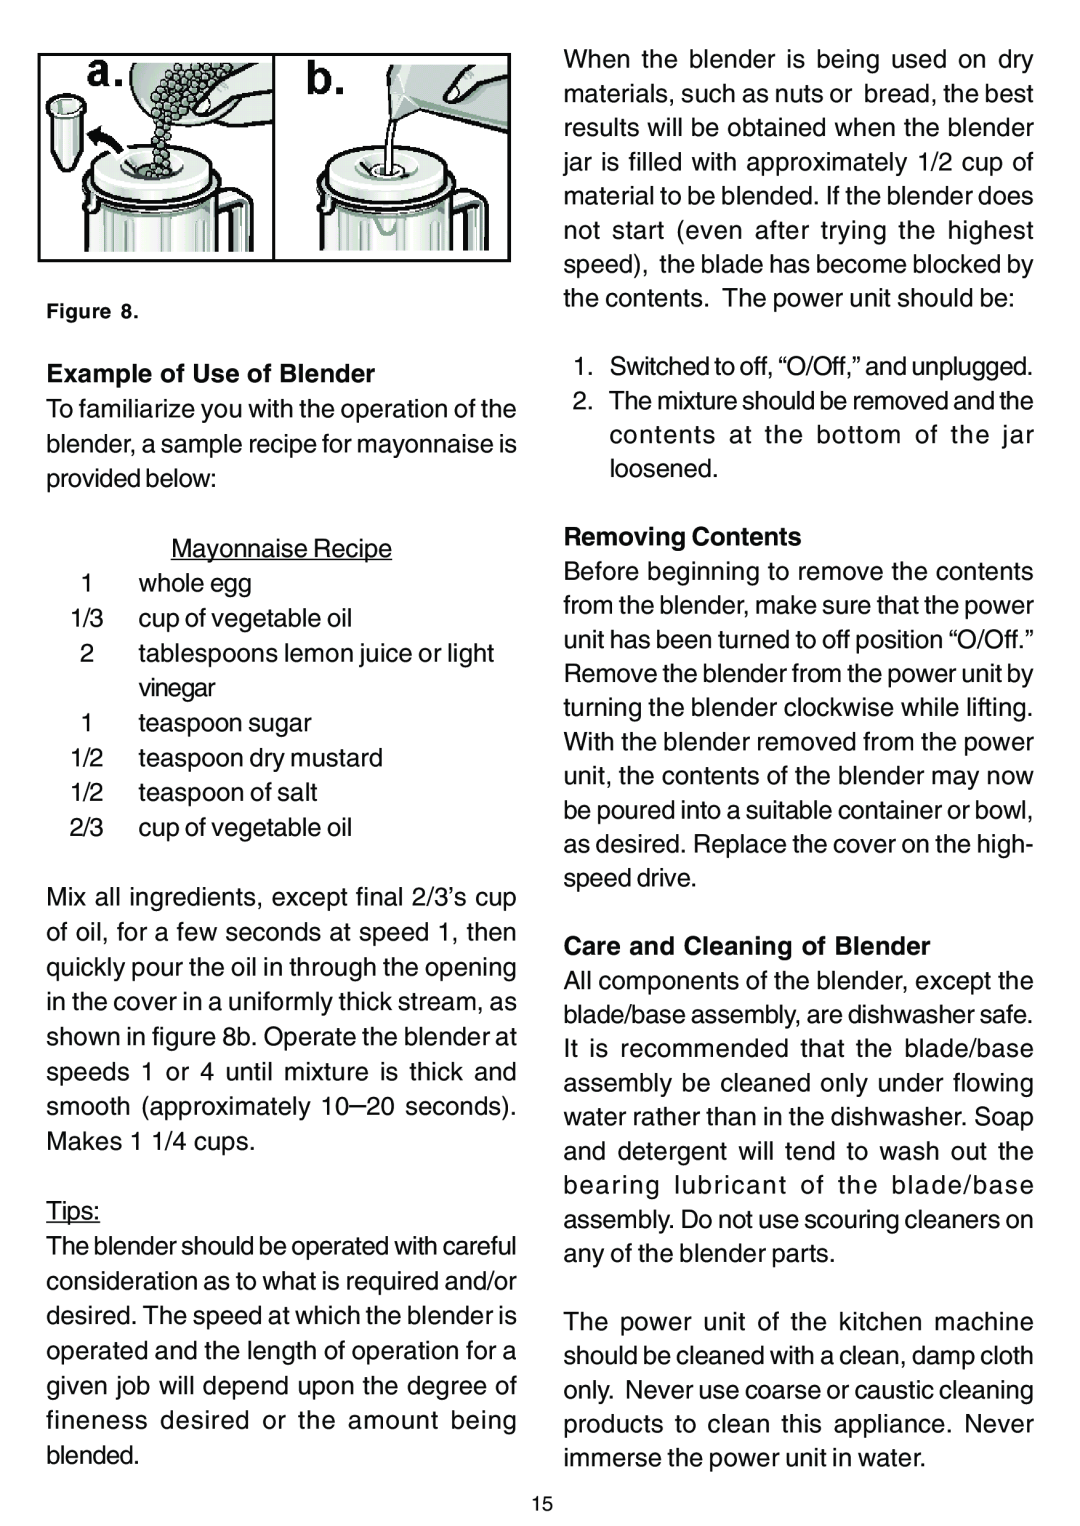 Bosch Appliances MUZ 4 MX2 manual Example of Use of Blender, Removing Contents, Care and Cleaning of Blender 